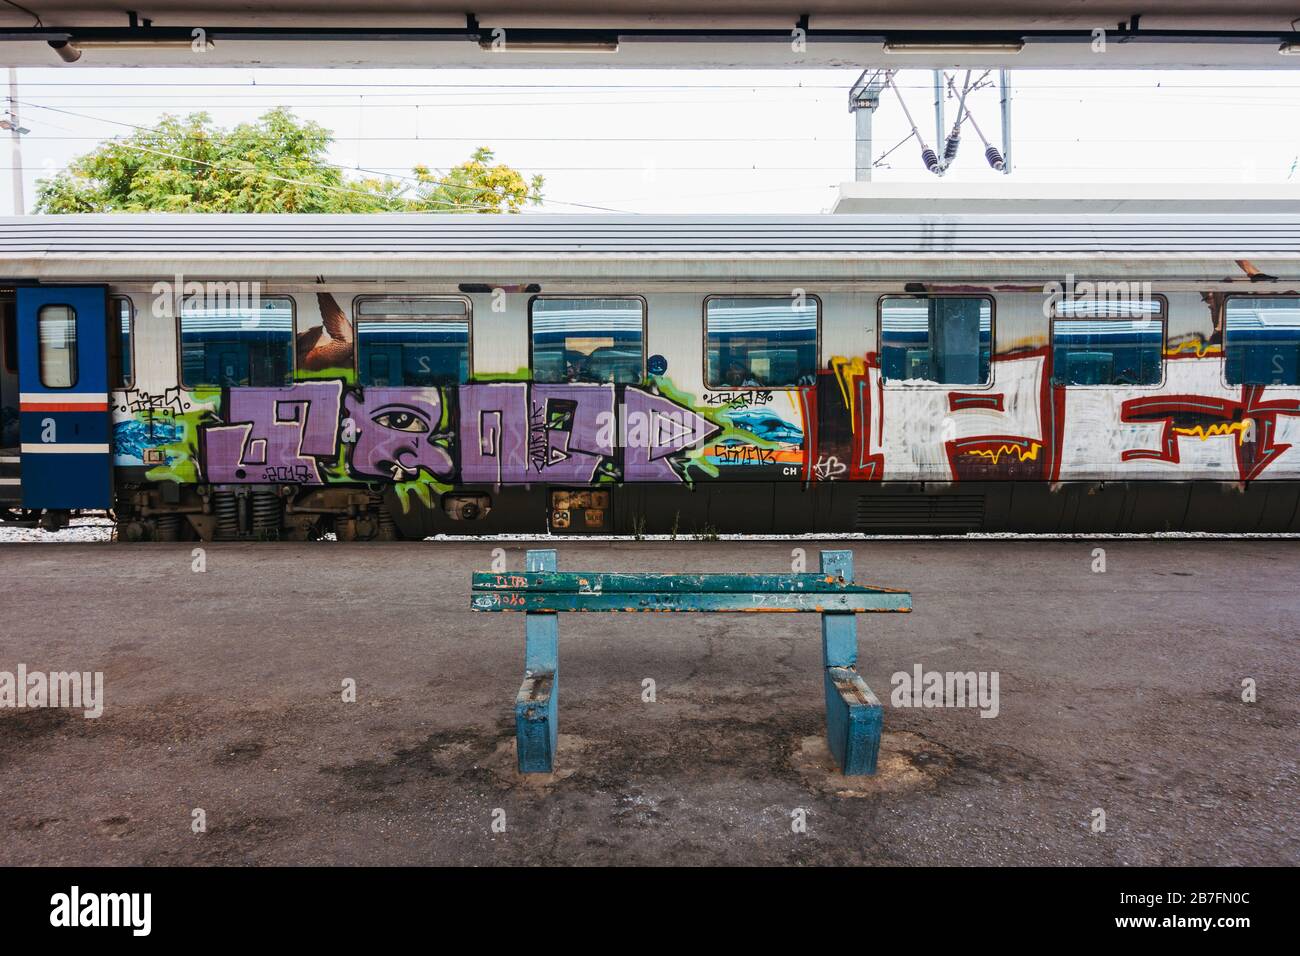 Passenger train carriages covered in graffiti at Thessaloniki Station, Greece, on the Athens to Thessaloniki high-speed train line Stock Photo